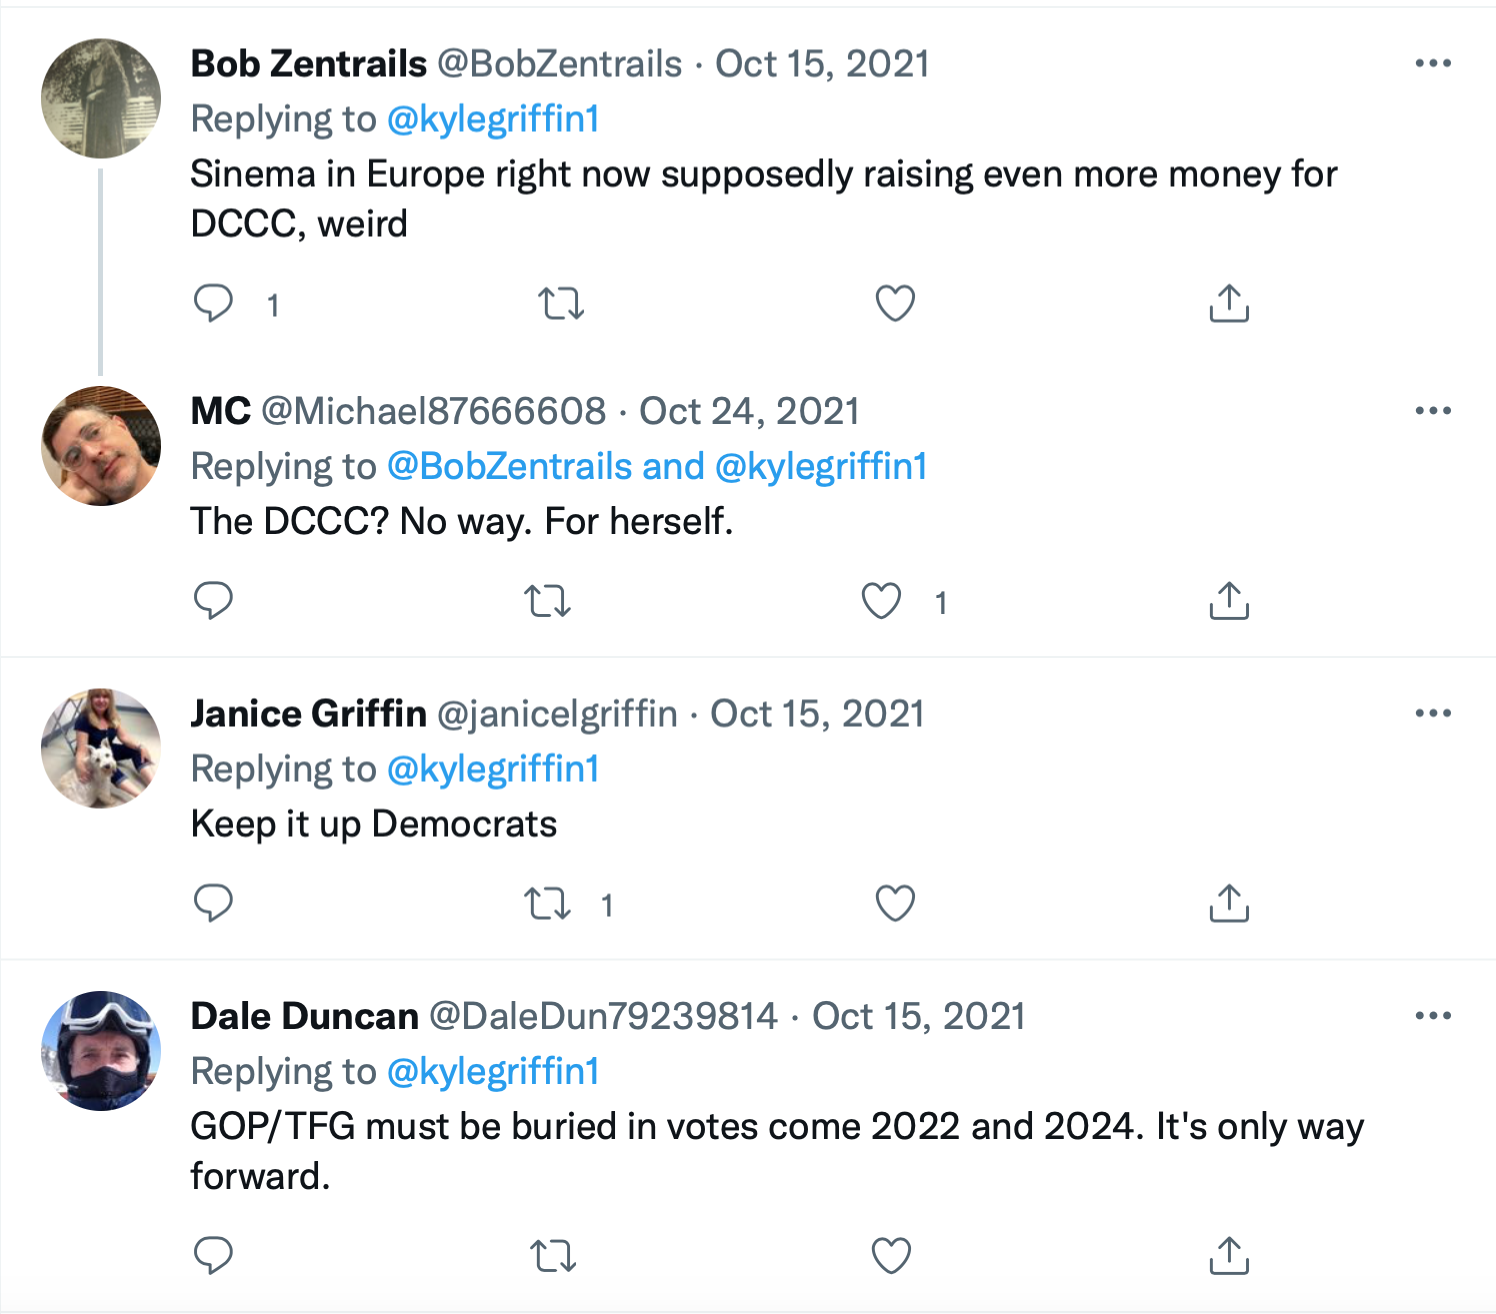 Screen-Shot-2022-10-13-at-10.49.56-AM-1 Democrats Outraise Republicans By $14.5M In One Month Election 2022 Featured Politics Top Stories Twitter 